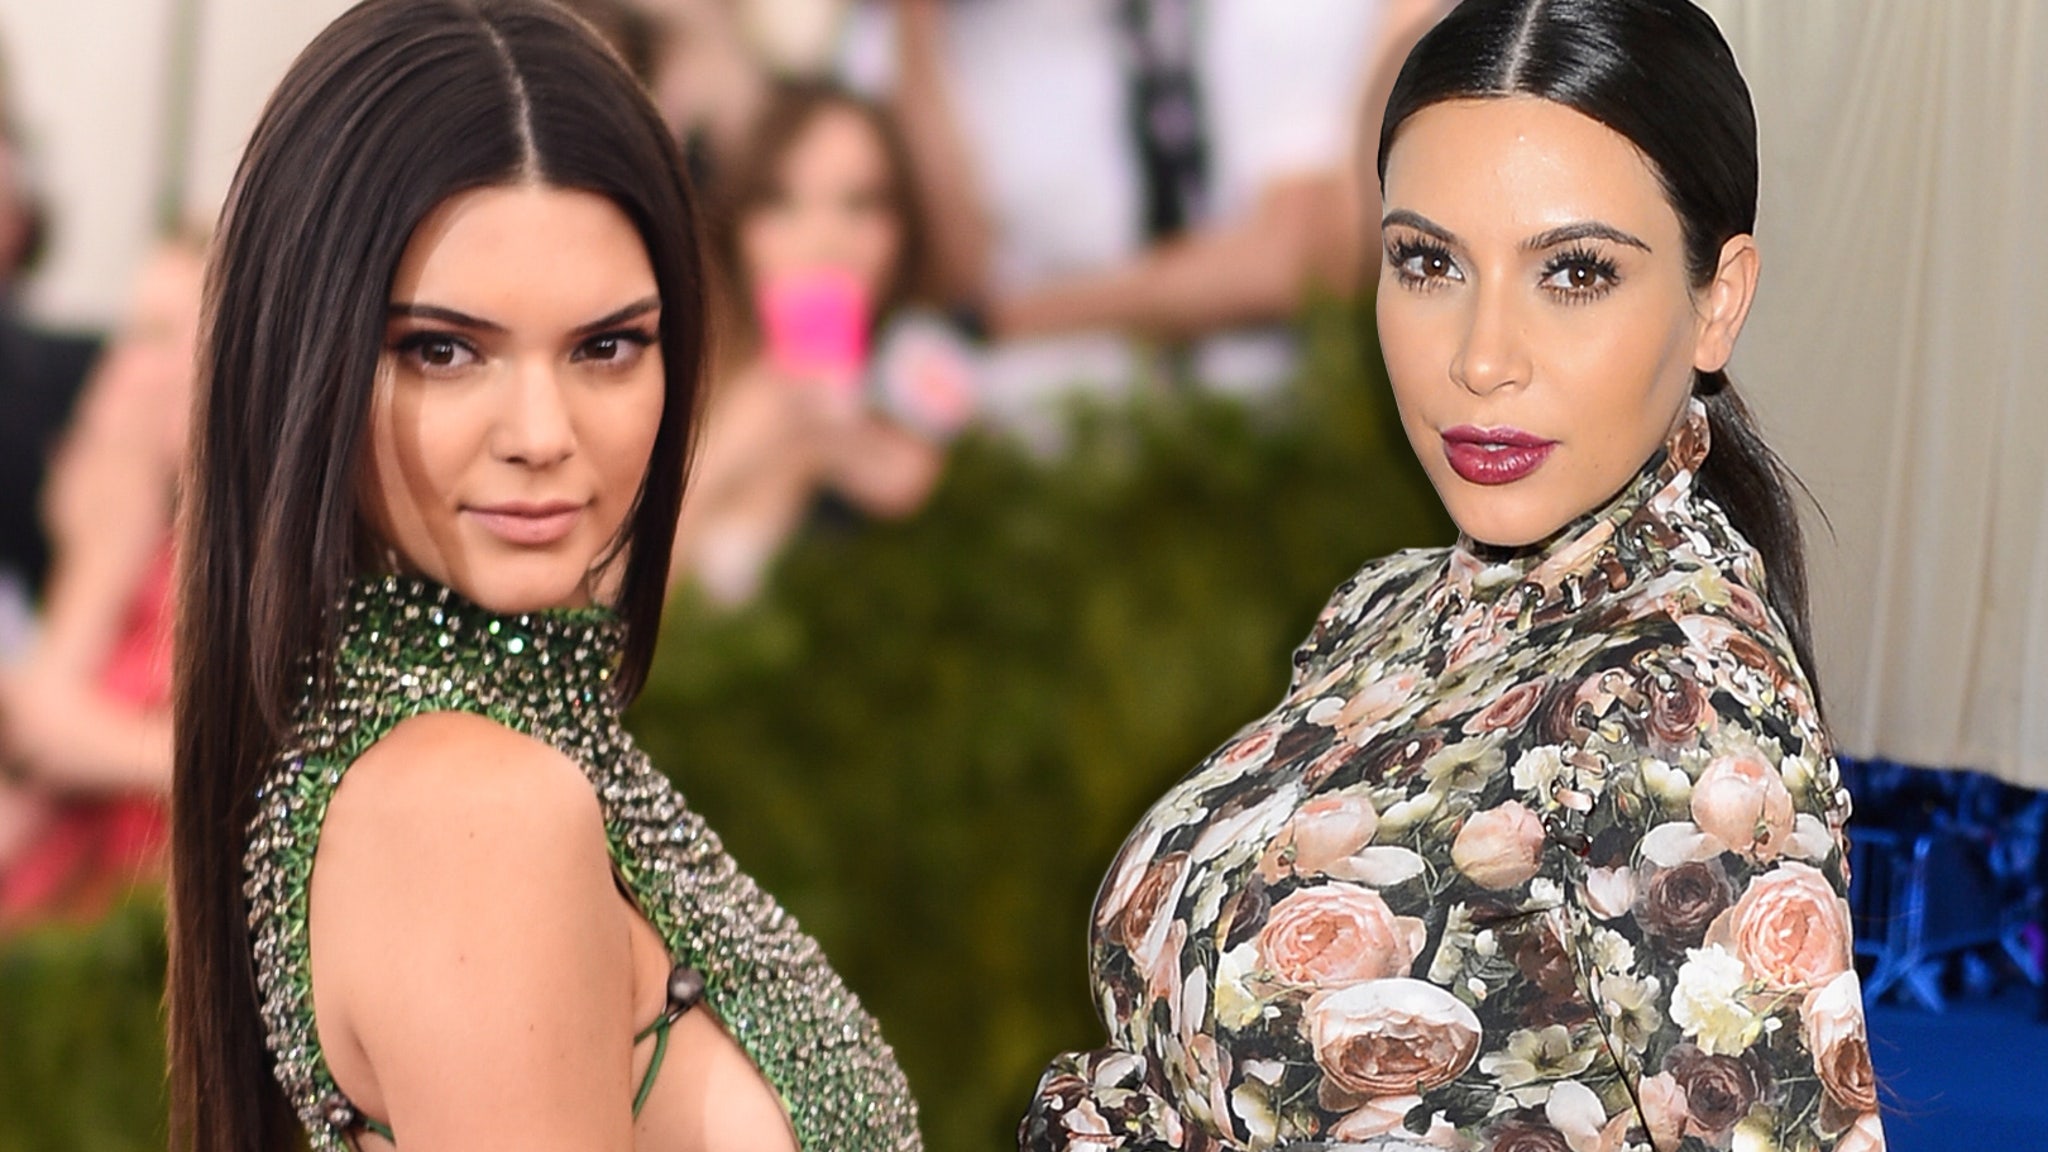 Every Time the Kardashian Fam Has Rocked the Met Gala Red Carpet